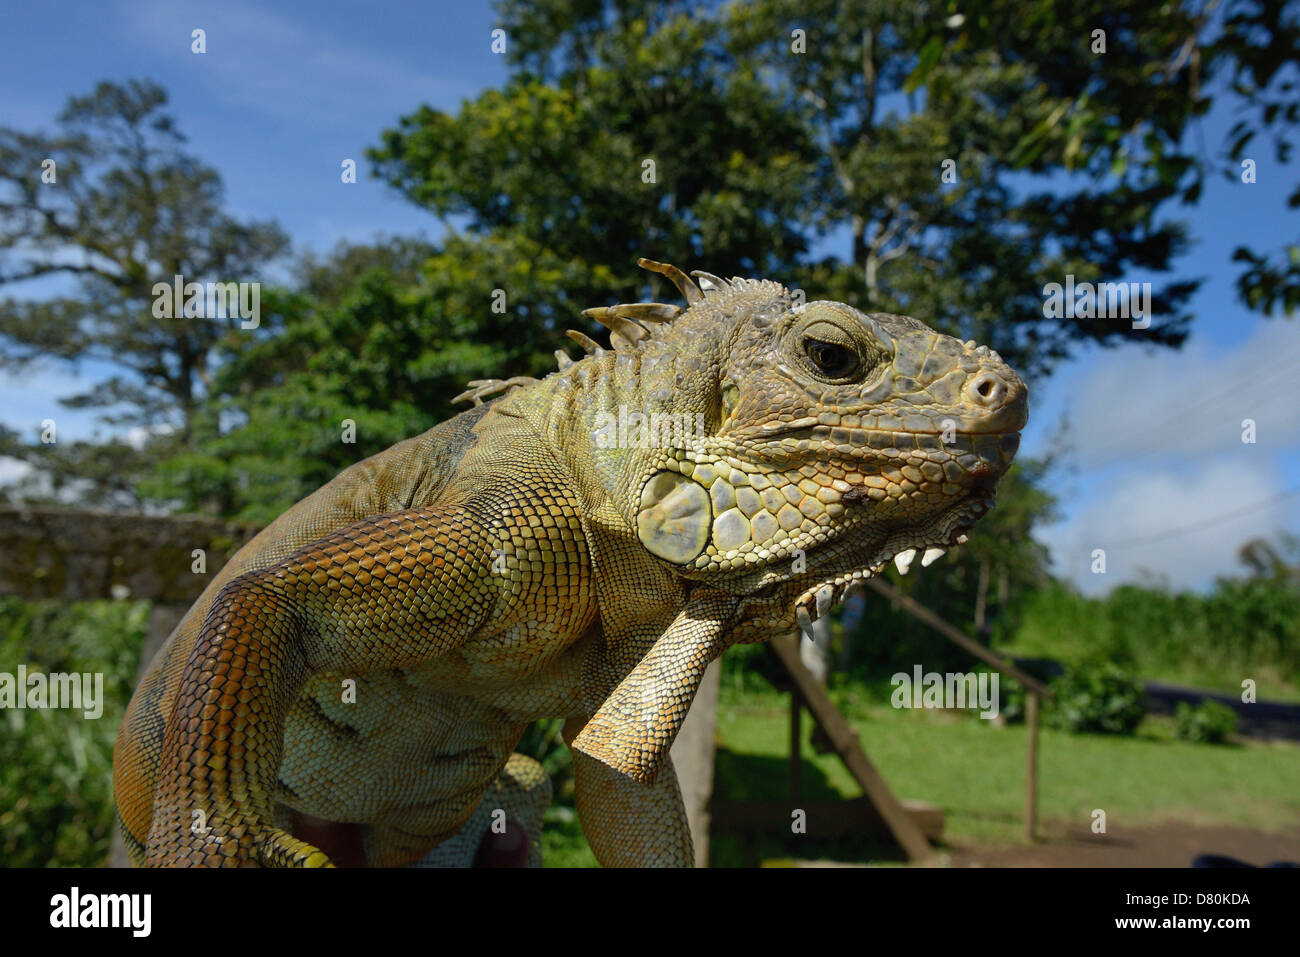 Indonesia, Bali, an iguana from the family of the iguanidae Stock Photo